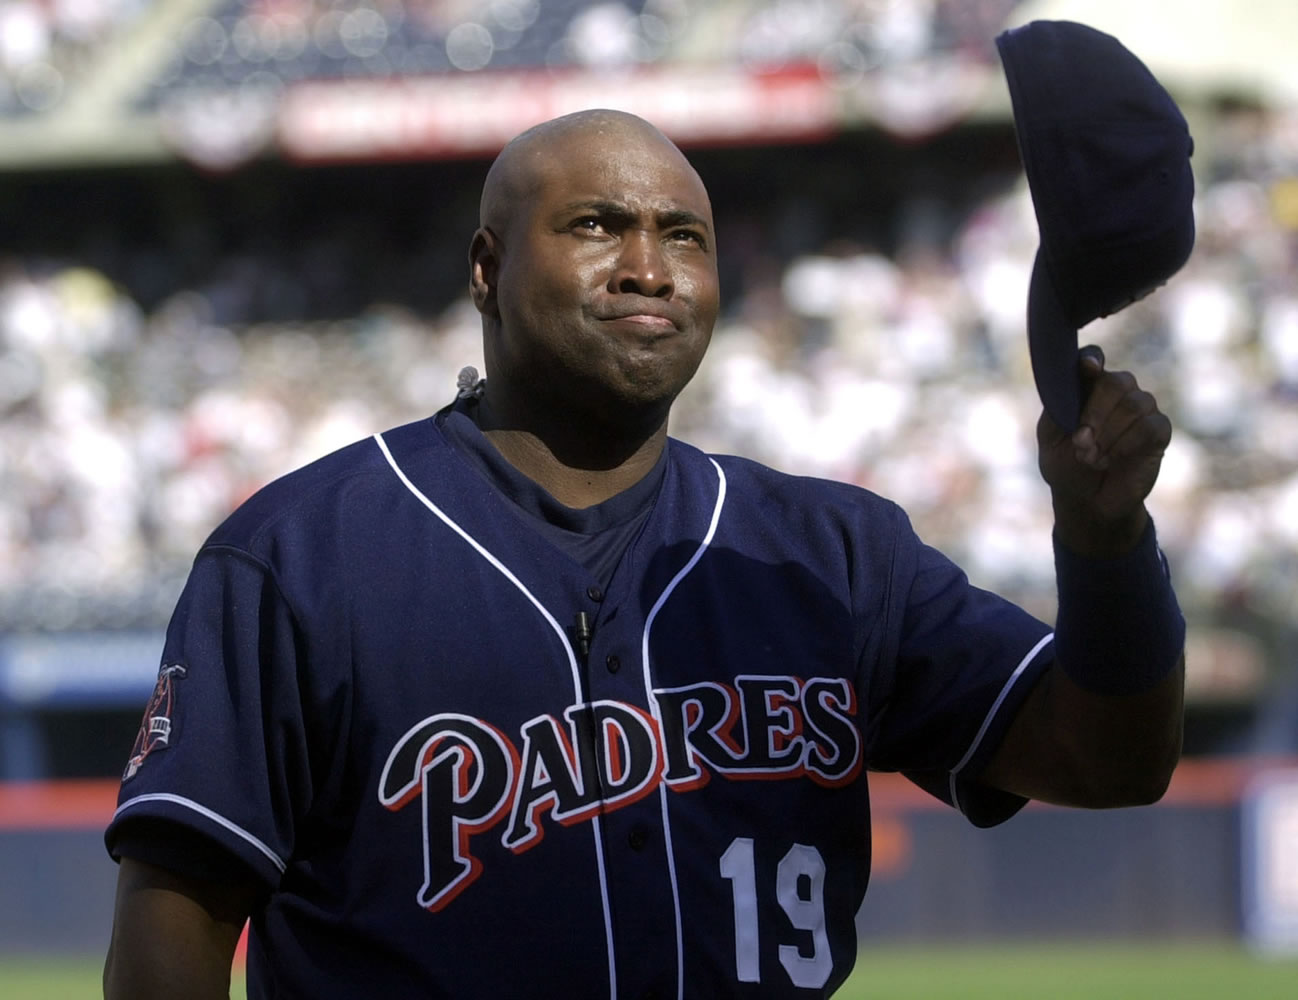 San Diego Padres' Tony Gwynn fights back tears as he acknowledges the standing ovation prior to the Padres' game against the Colorado Rockies, the final game of his career, in San Diego in 2001. The Baseball Hall of Fame said Gwynn died of cancer on Monday.